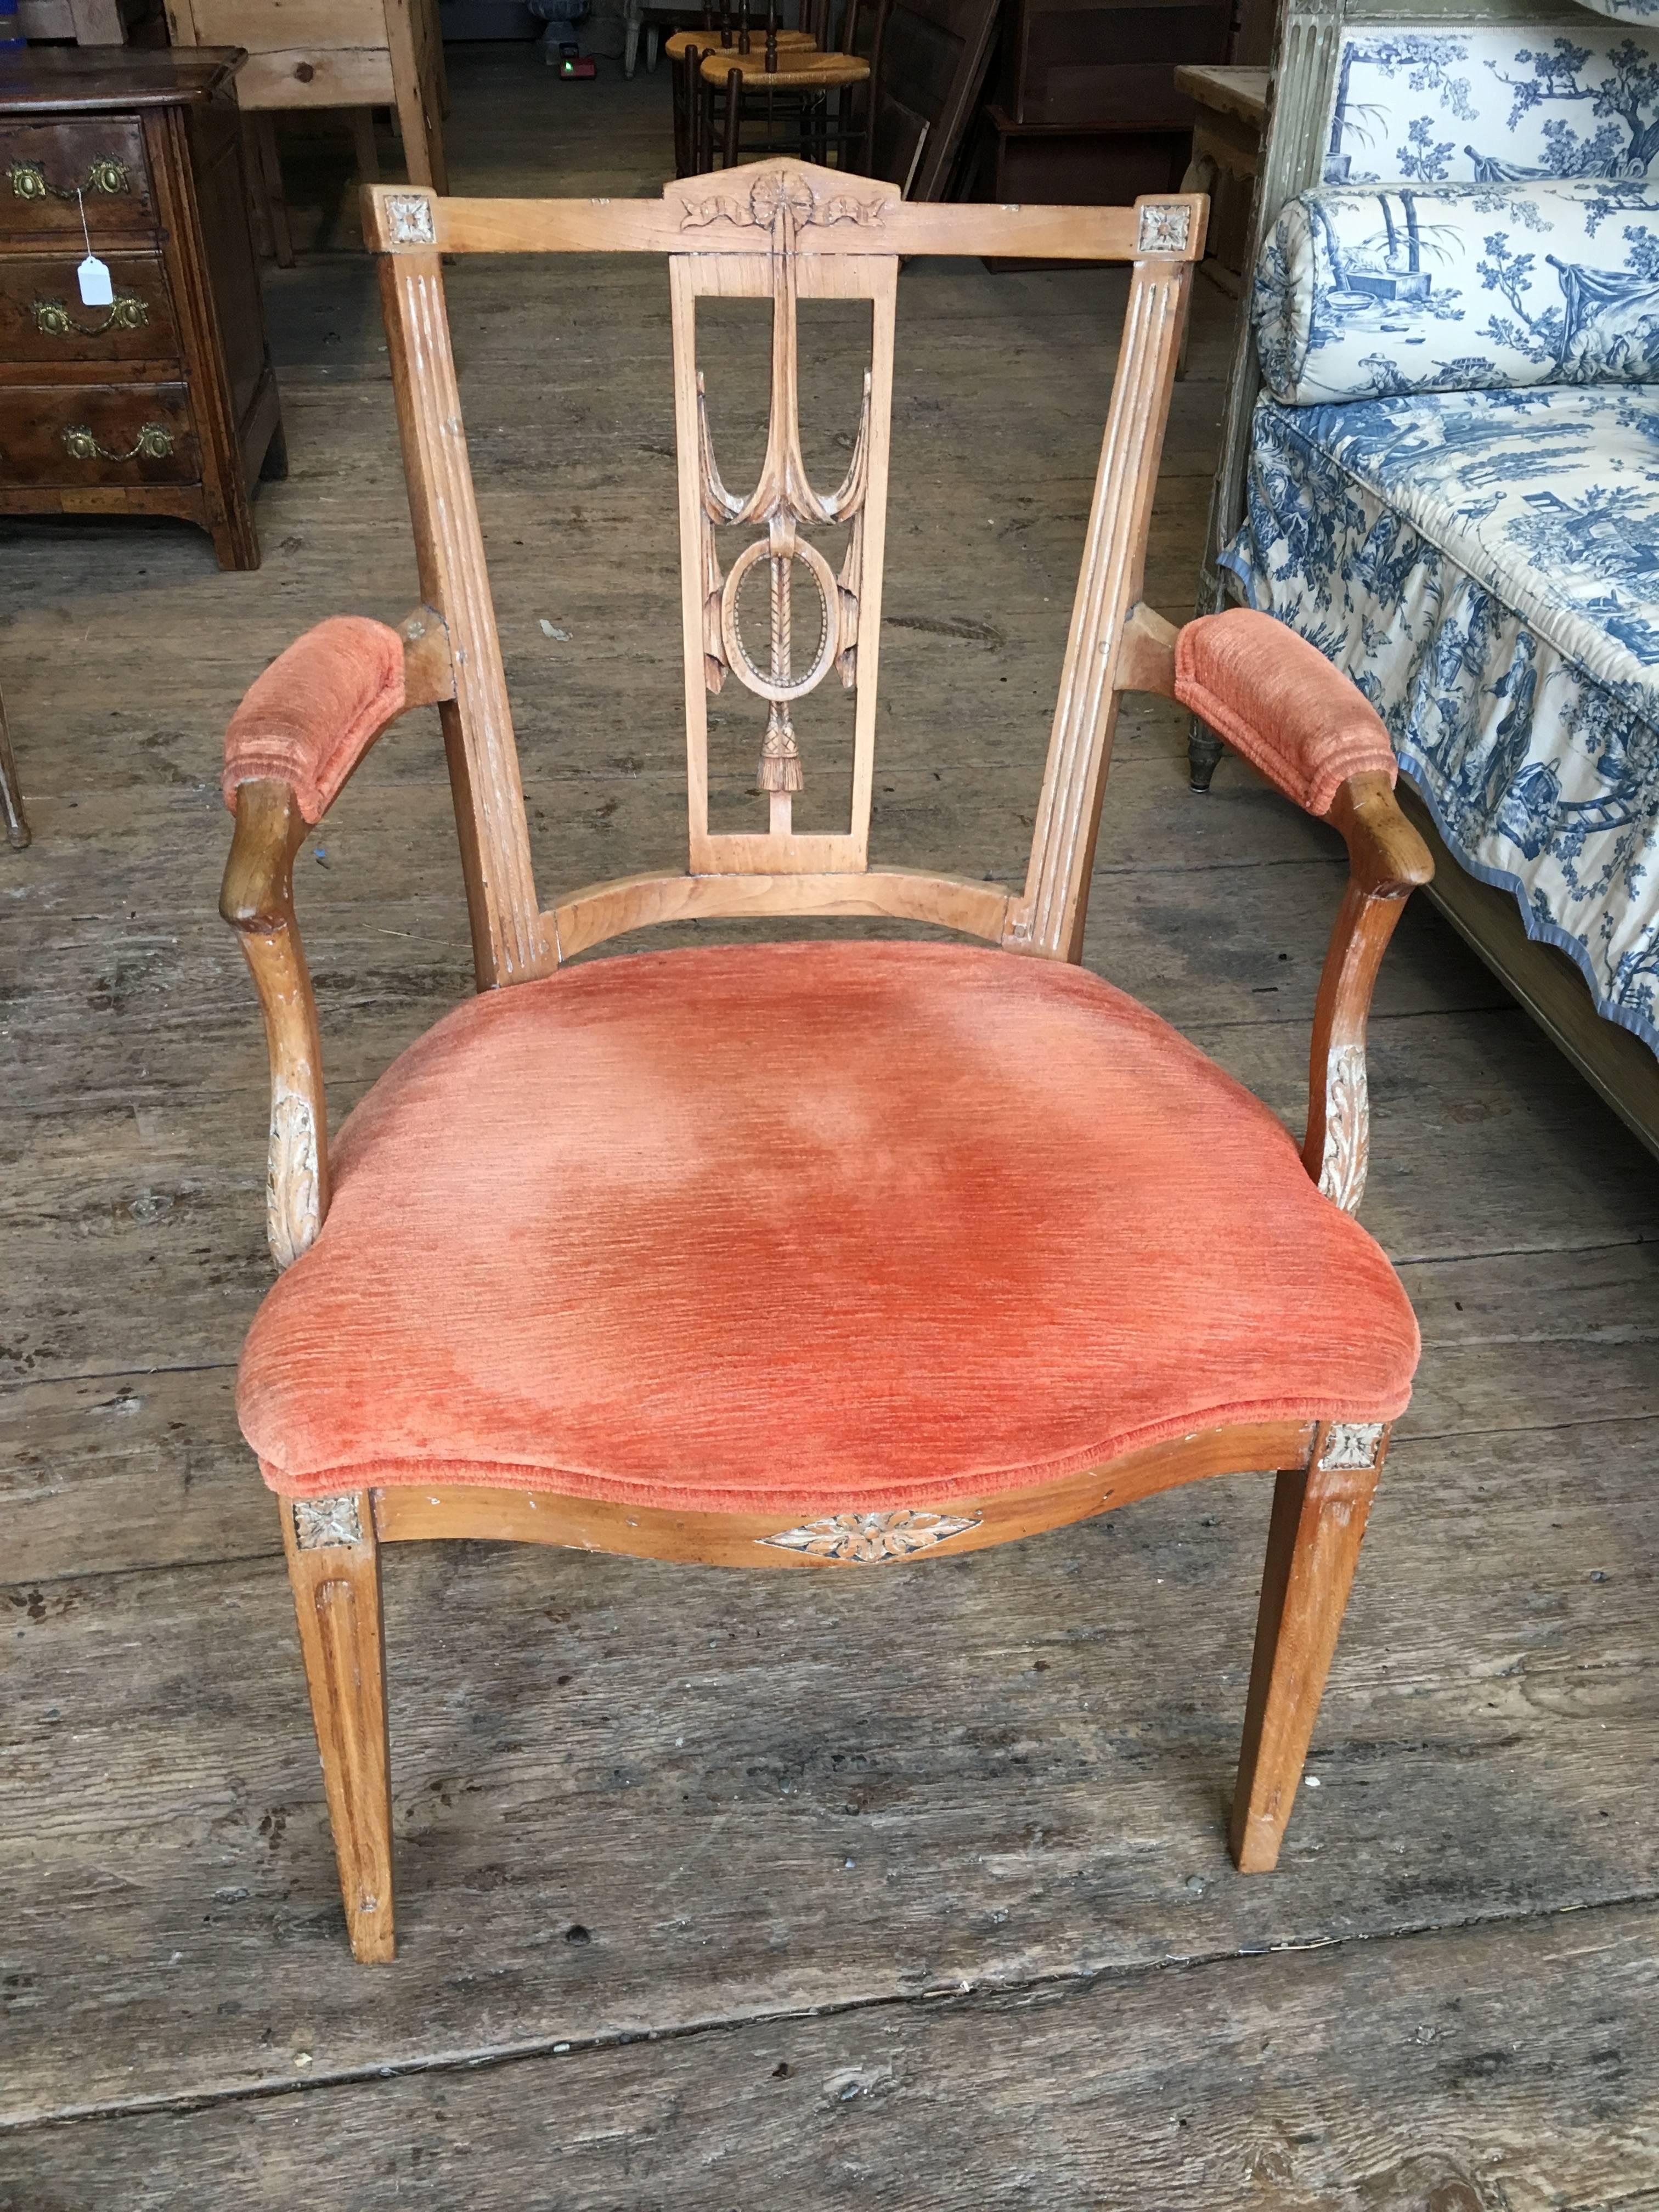 An mid-19th century Italian neoclassic armchair with carved lyre back and upholstered seat, circa 1840-1860.